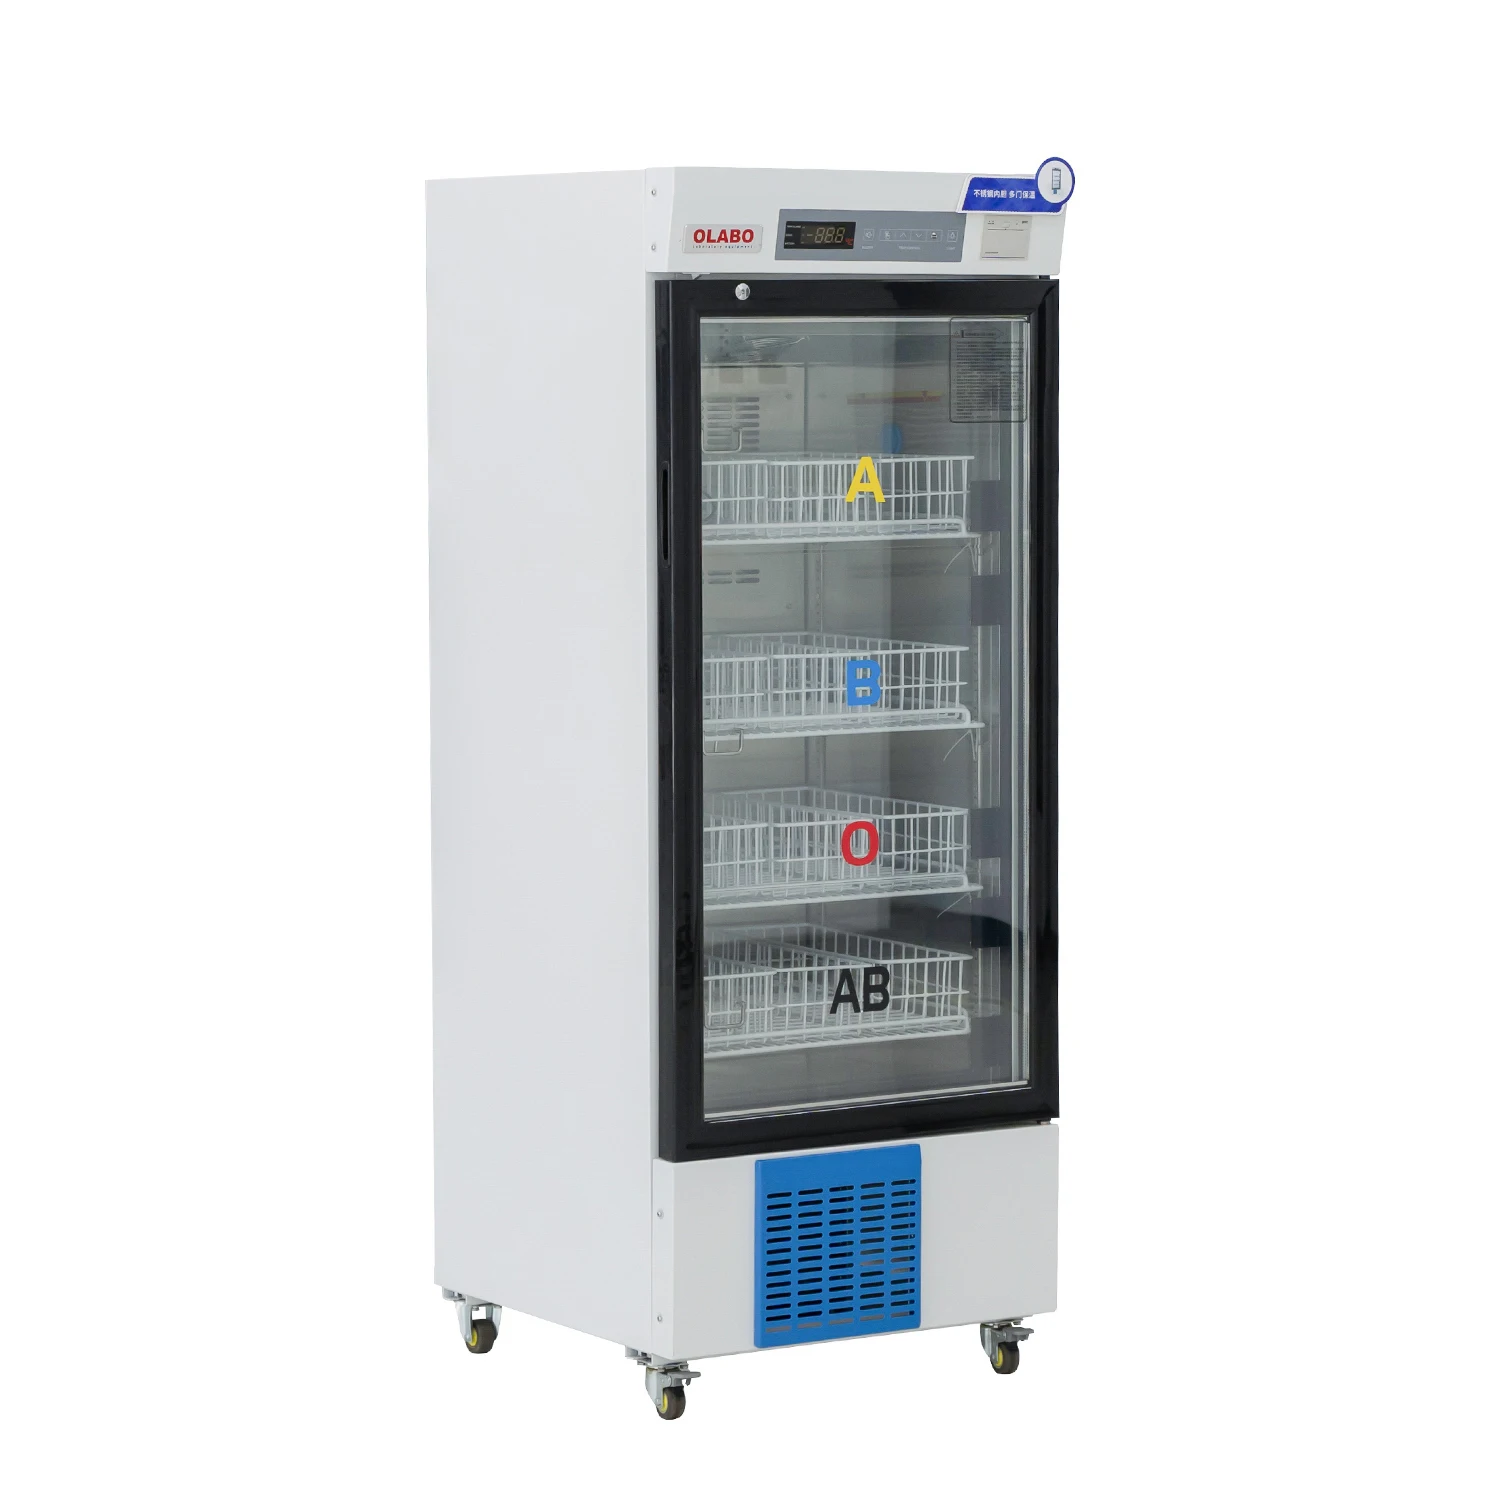 OLABO Blood Bank Refrigerator for medical and laboratory cold storage